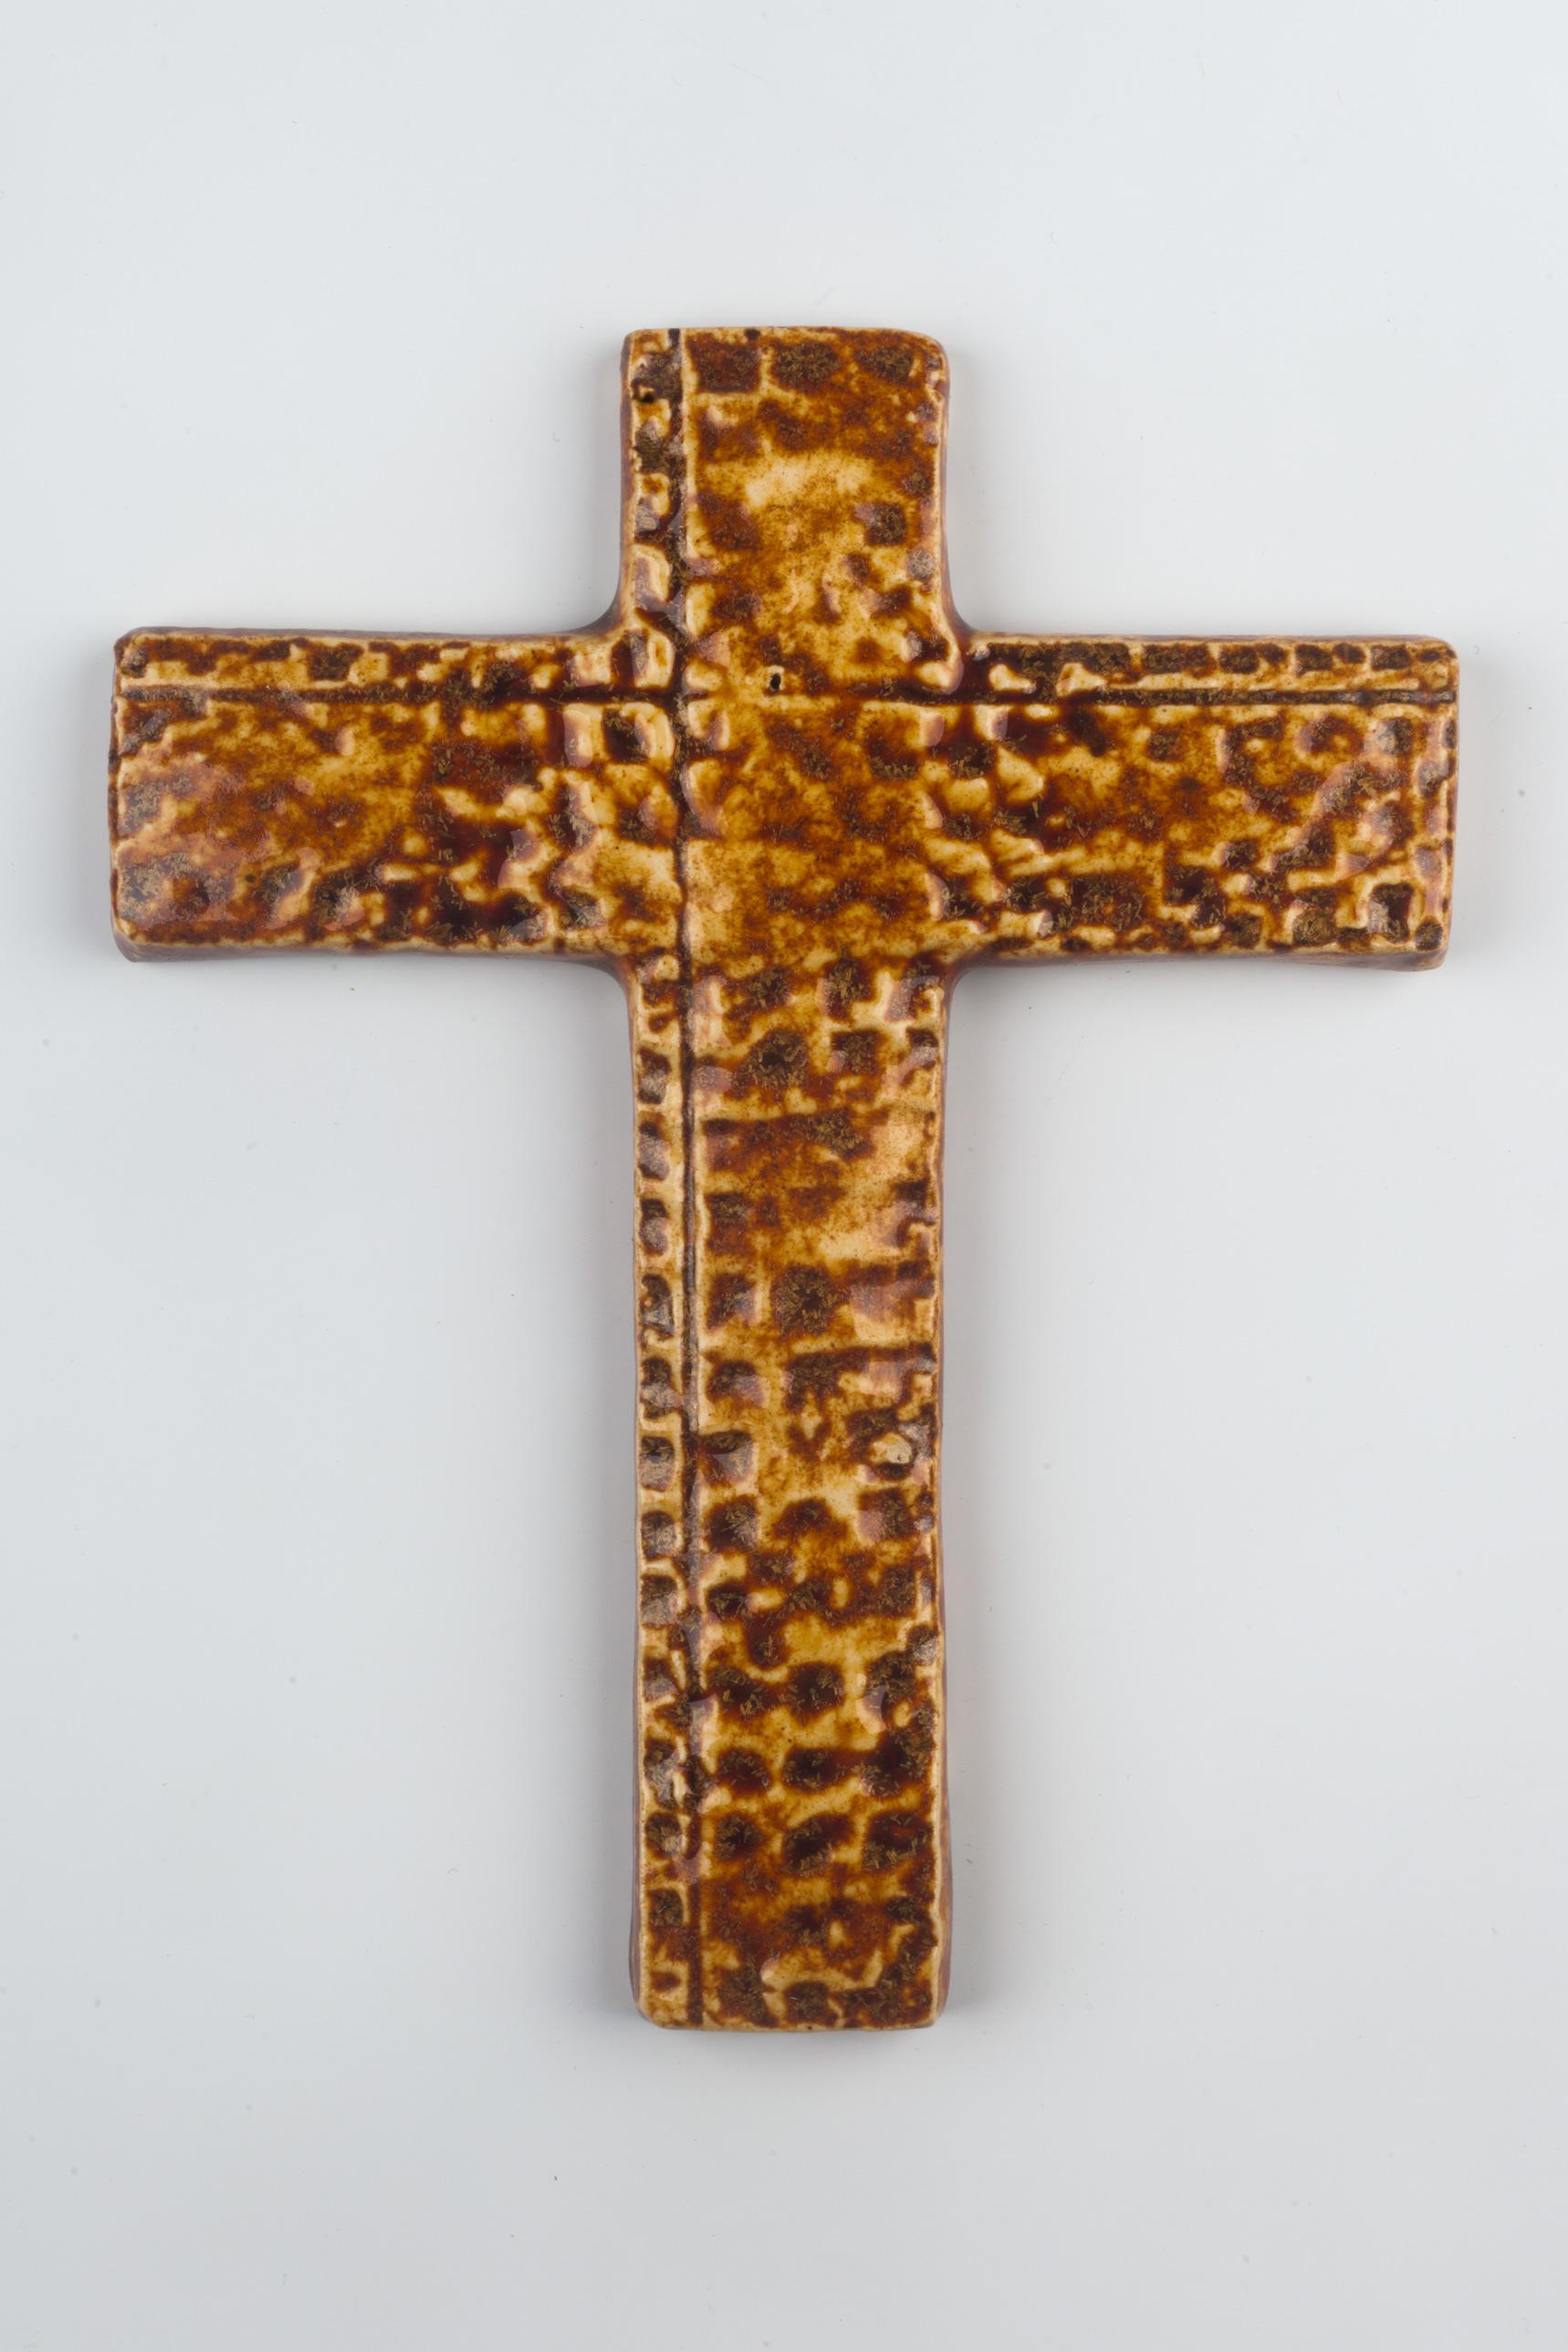 Mid-century European ceramic wall cross in glossy brown, off-white and beige. This wall cross features a unique cross hatch style in the glazed ceramic, giving it the look of a woven fabric.

DIMENSIONS

6.5 in. H x 5.13 in. W x 0.38 in. D

17